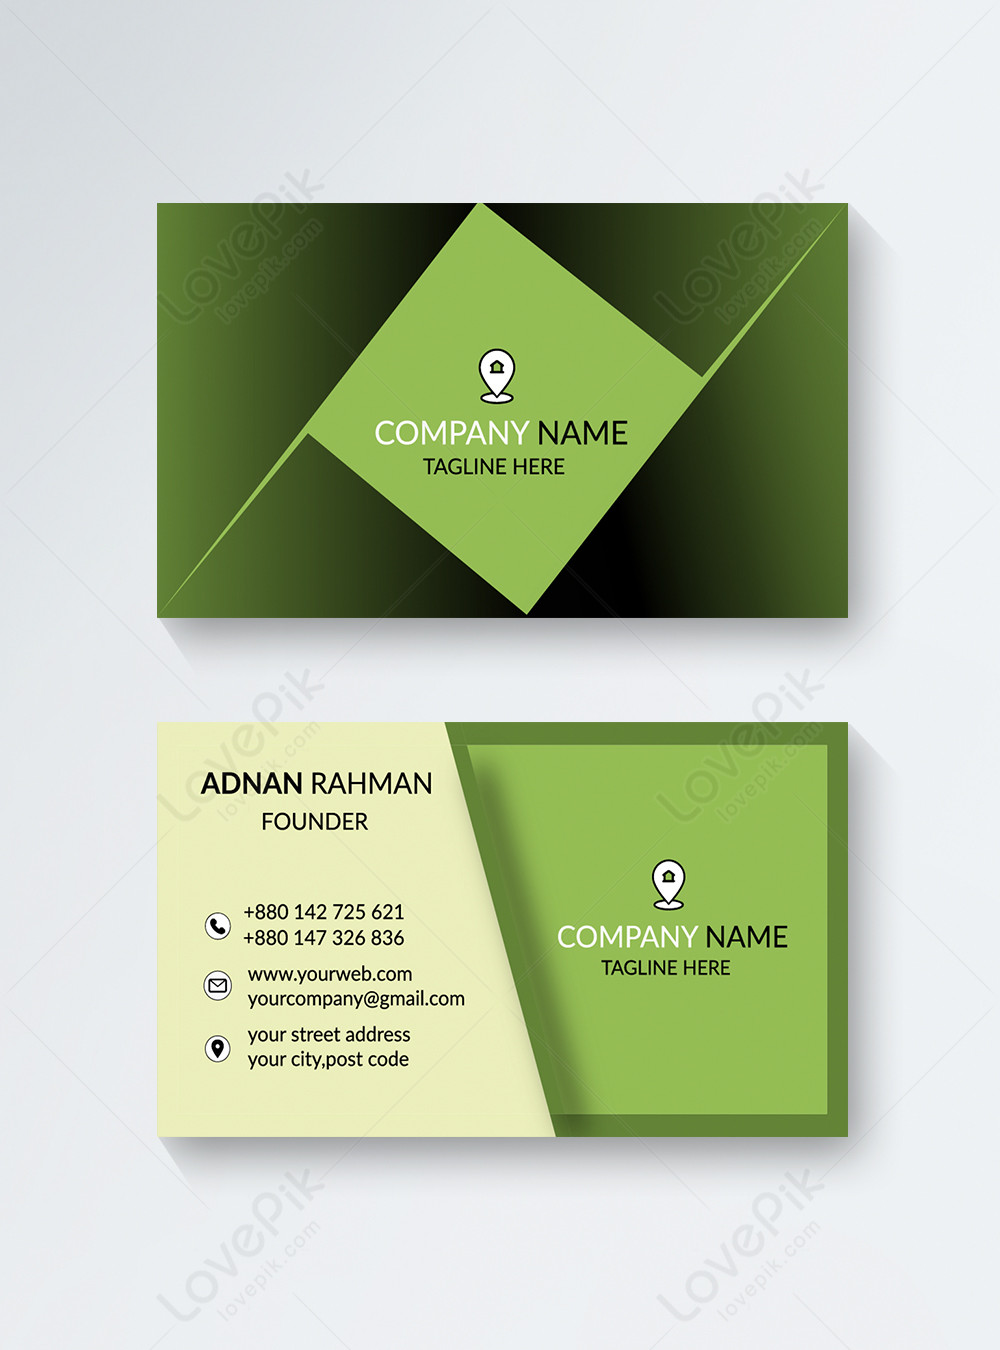 corporate-business-card-template-template-image-picture-free-download